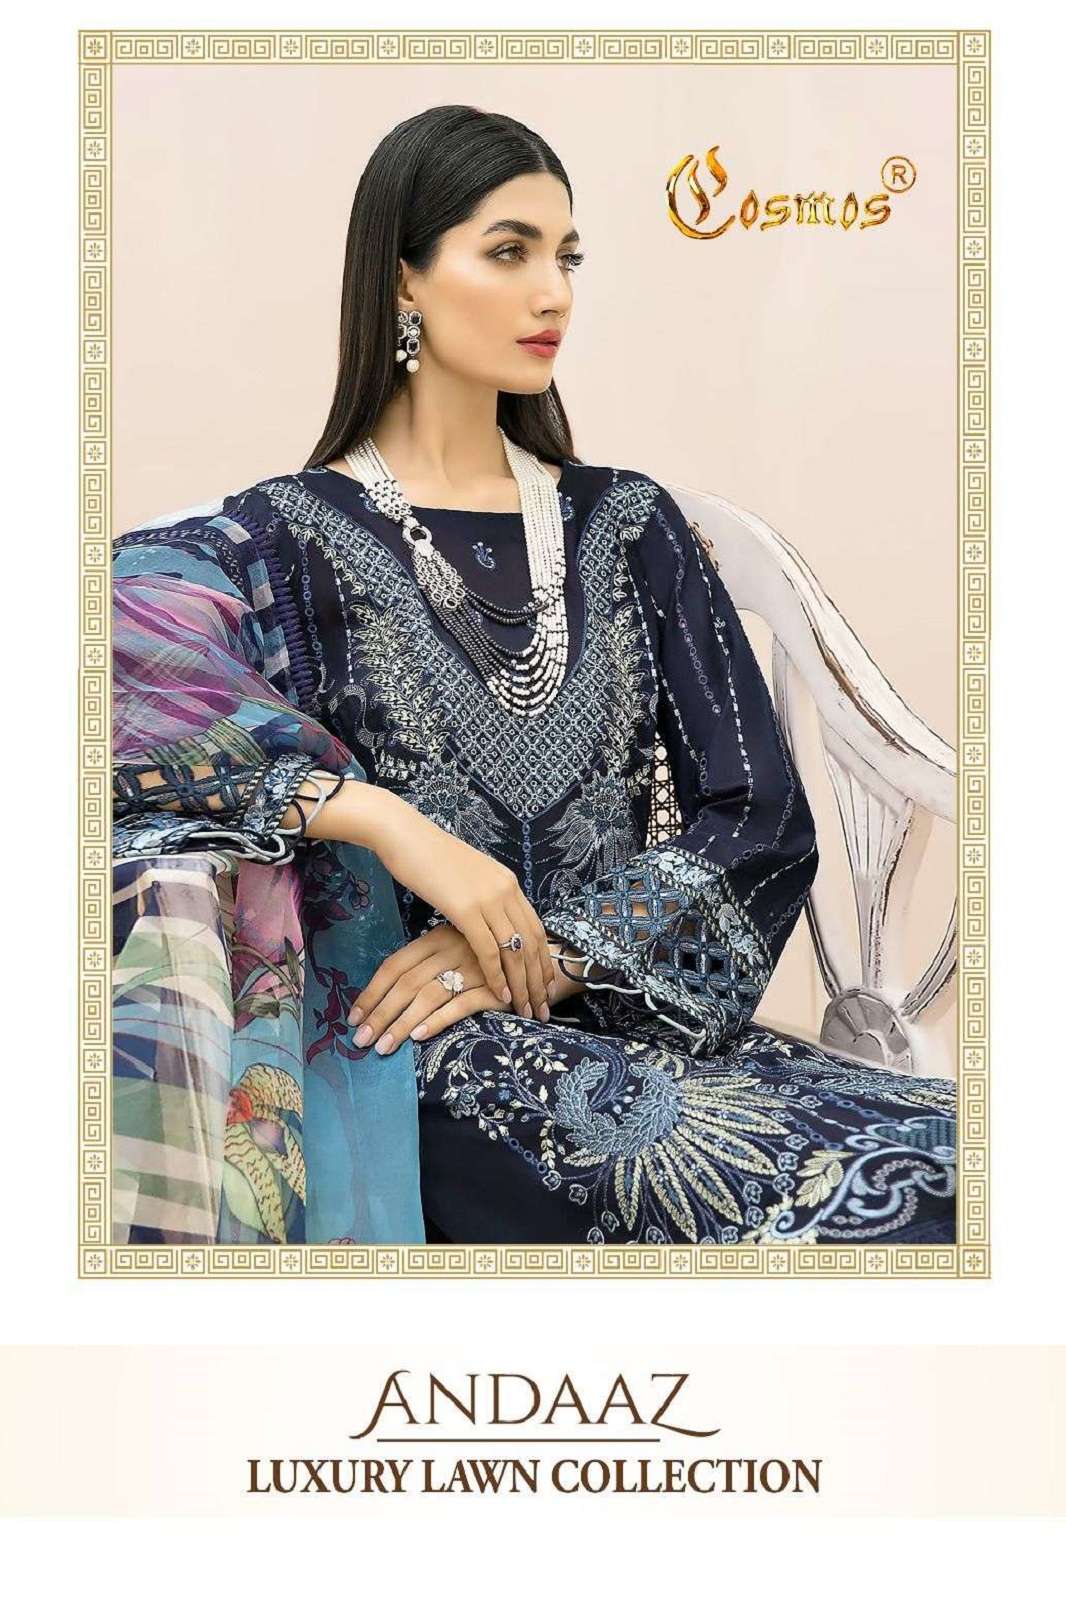 COSMOS FASHION ANDAAZ LUXURY LAWN COLLECTION